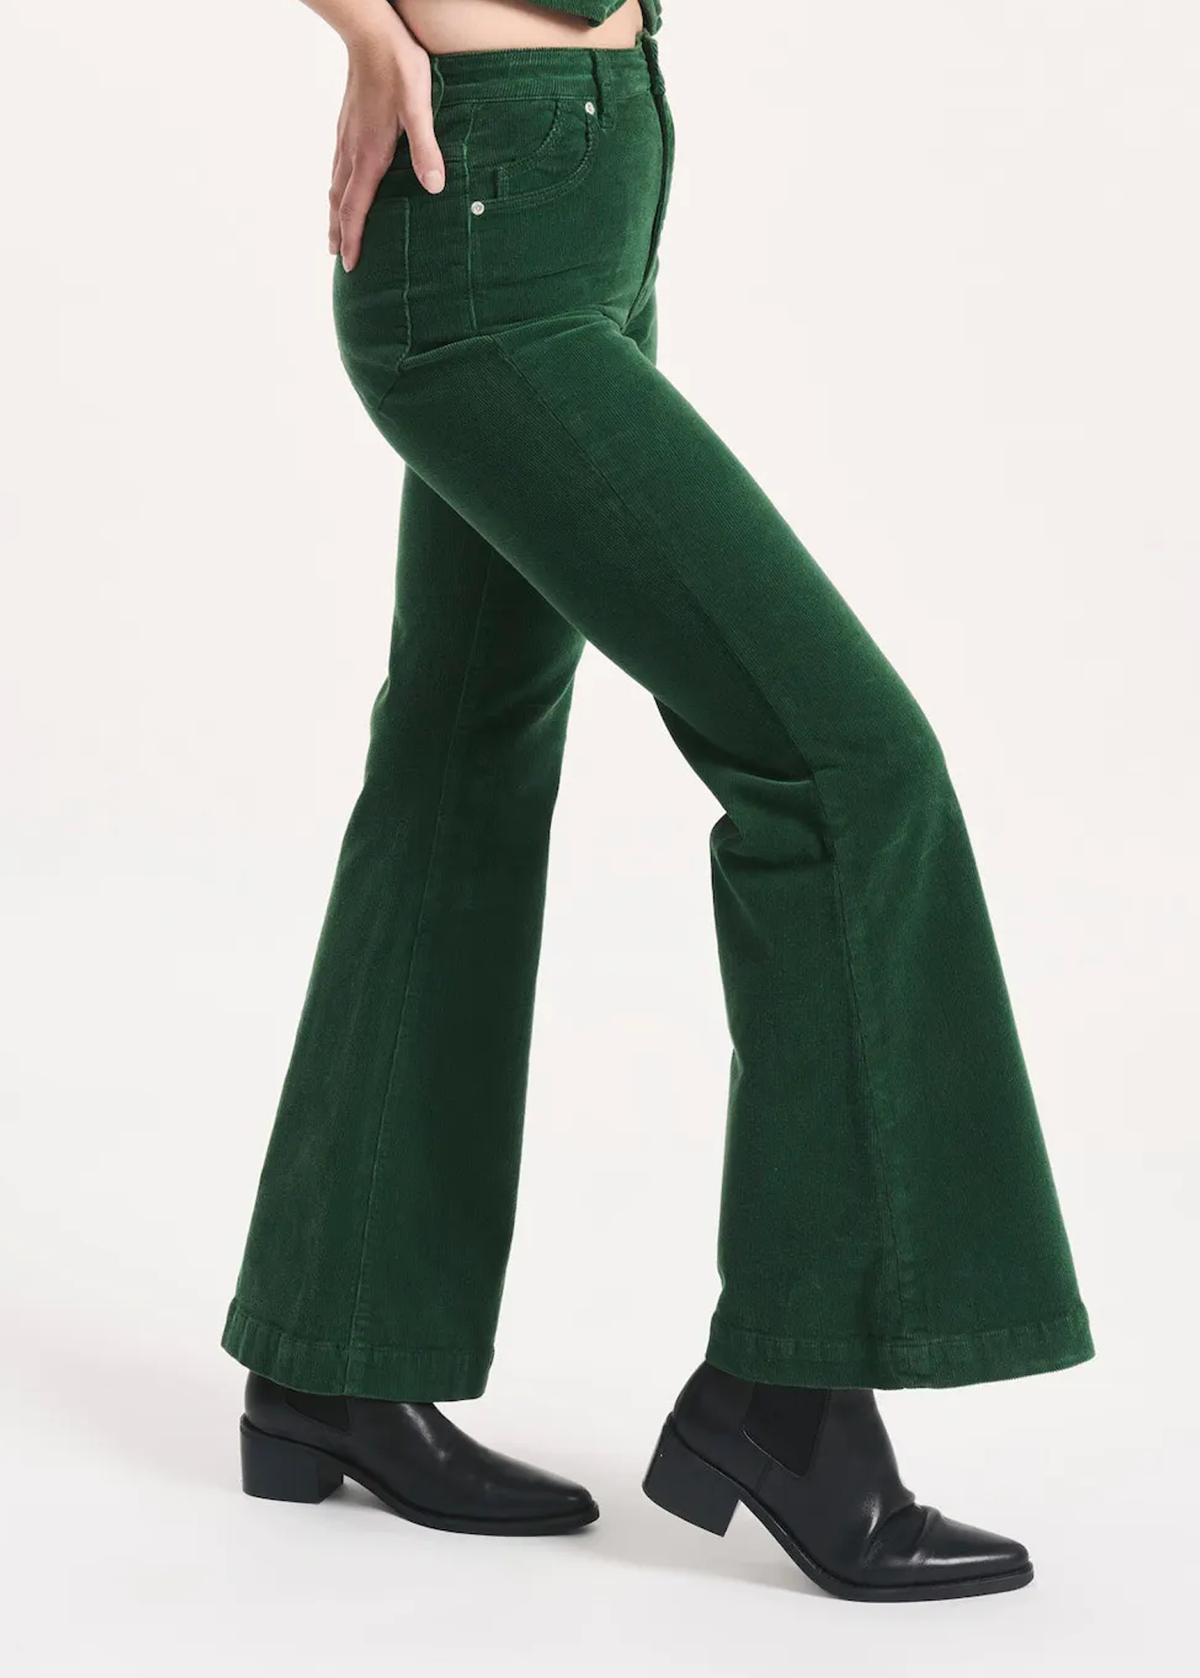 70s inspired High Waist Basil Green Corduroy Eastcoast Flares Bell Bottoms by Rolla's Jeans